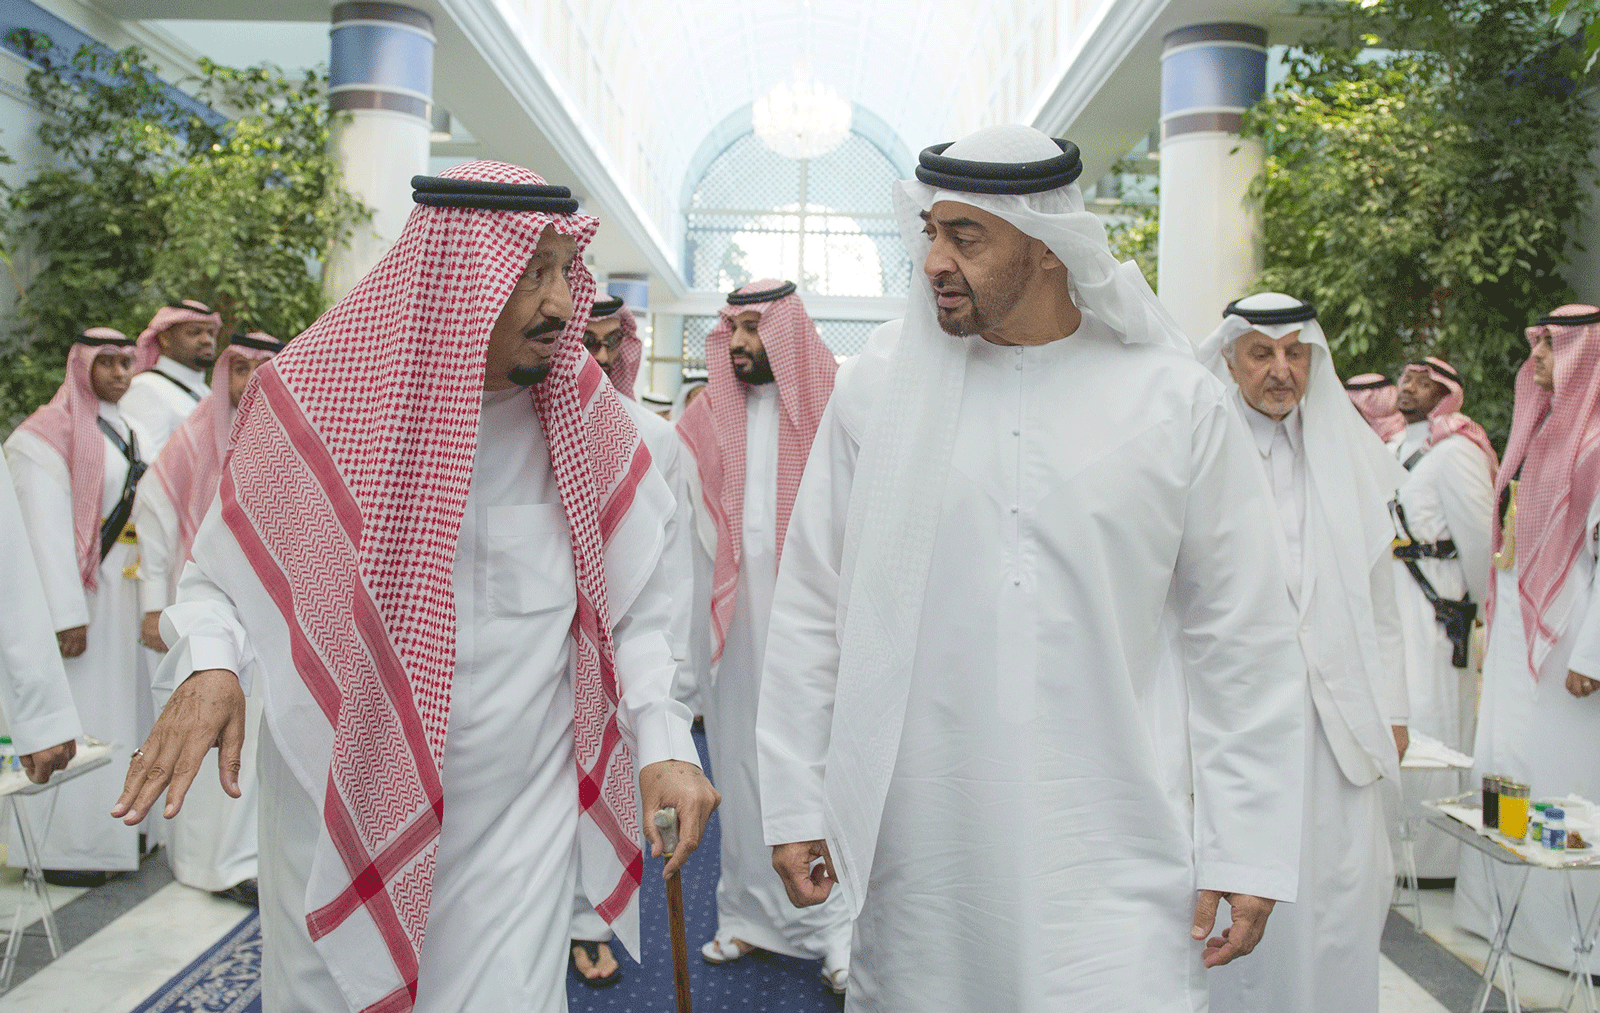 Close relationship: King Salman, left, with Sheikh Mohammed bin Zayed, Crown Prince of Abu Dhabi and Deputy Supreme Commander of the UAE Armed Forces, in Jeddah in June Bandar Algaloud / Saudi Royal Council / Handout/Anadolu Agency/Getty Images